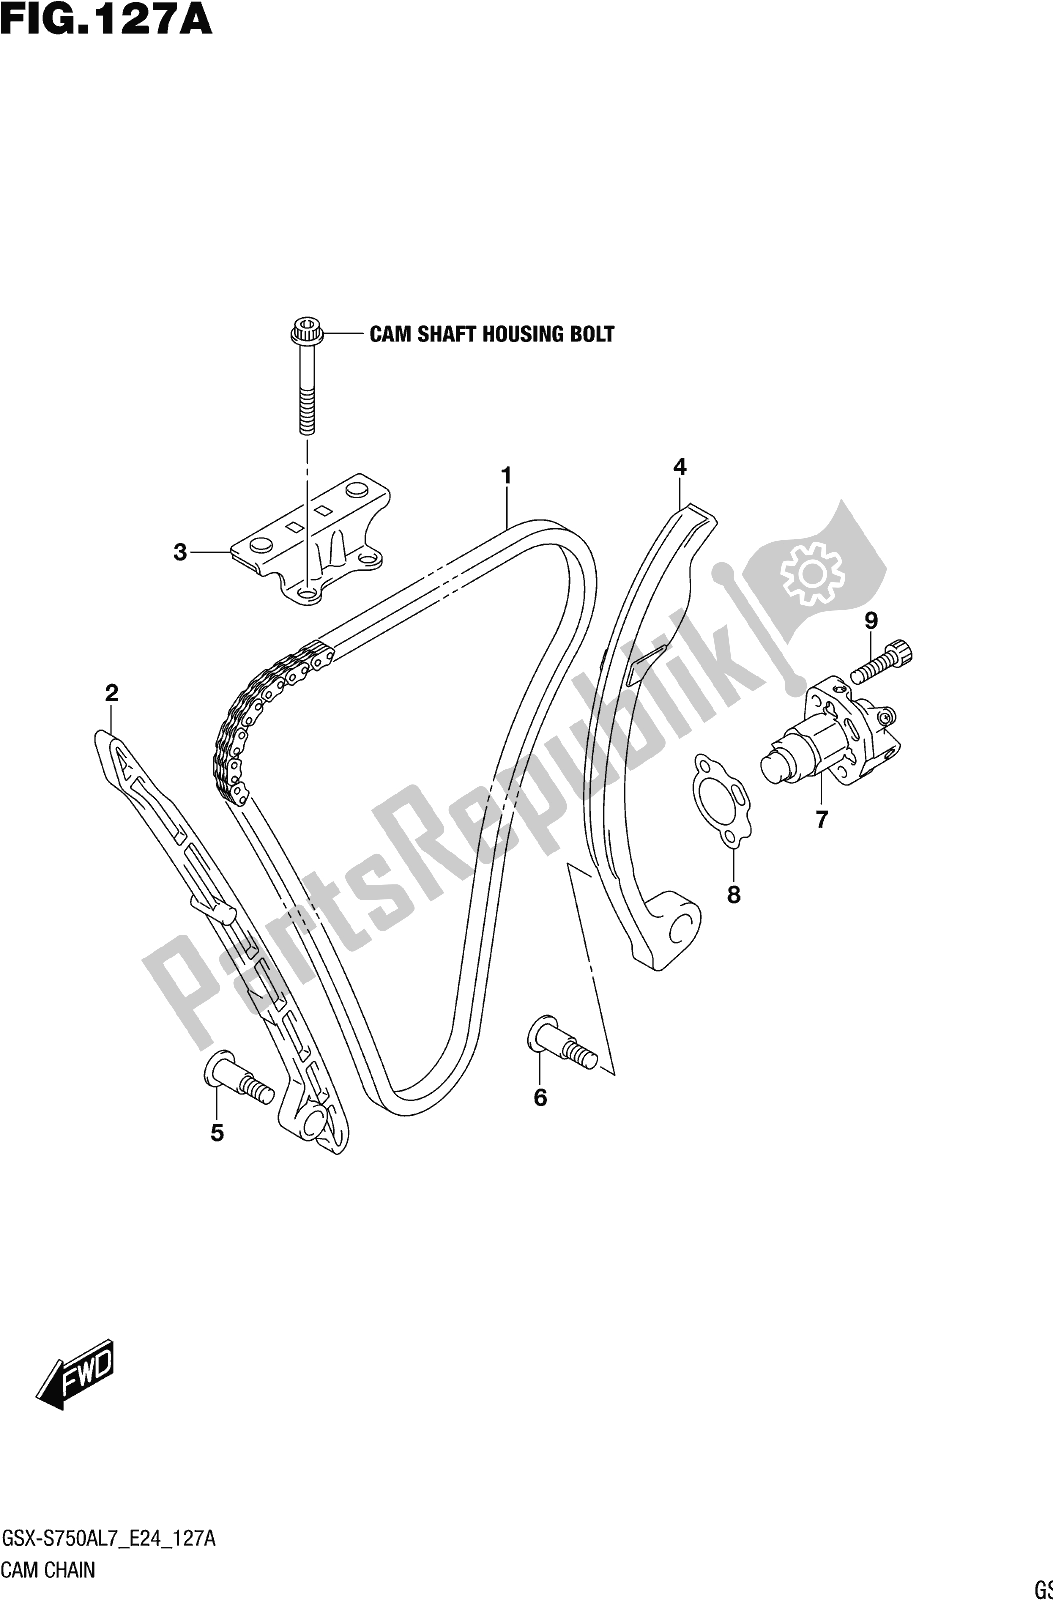 All parts for the Fig. 127a Cam Chain of the Suzuki Gsx-s 750 AZ 2017